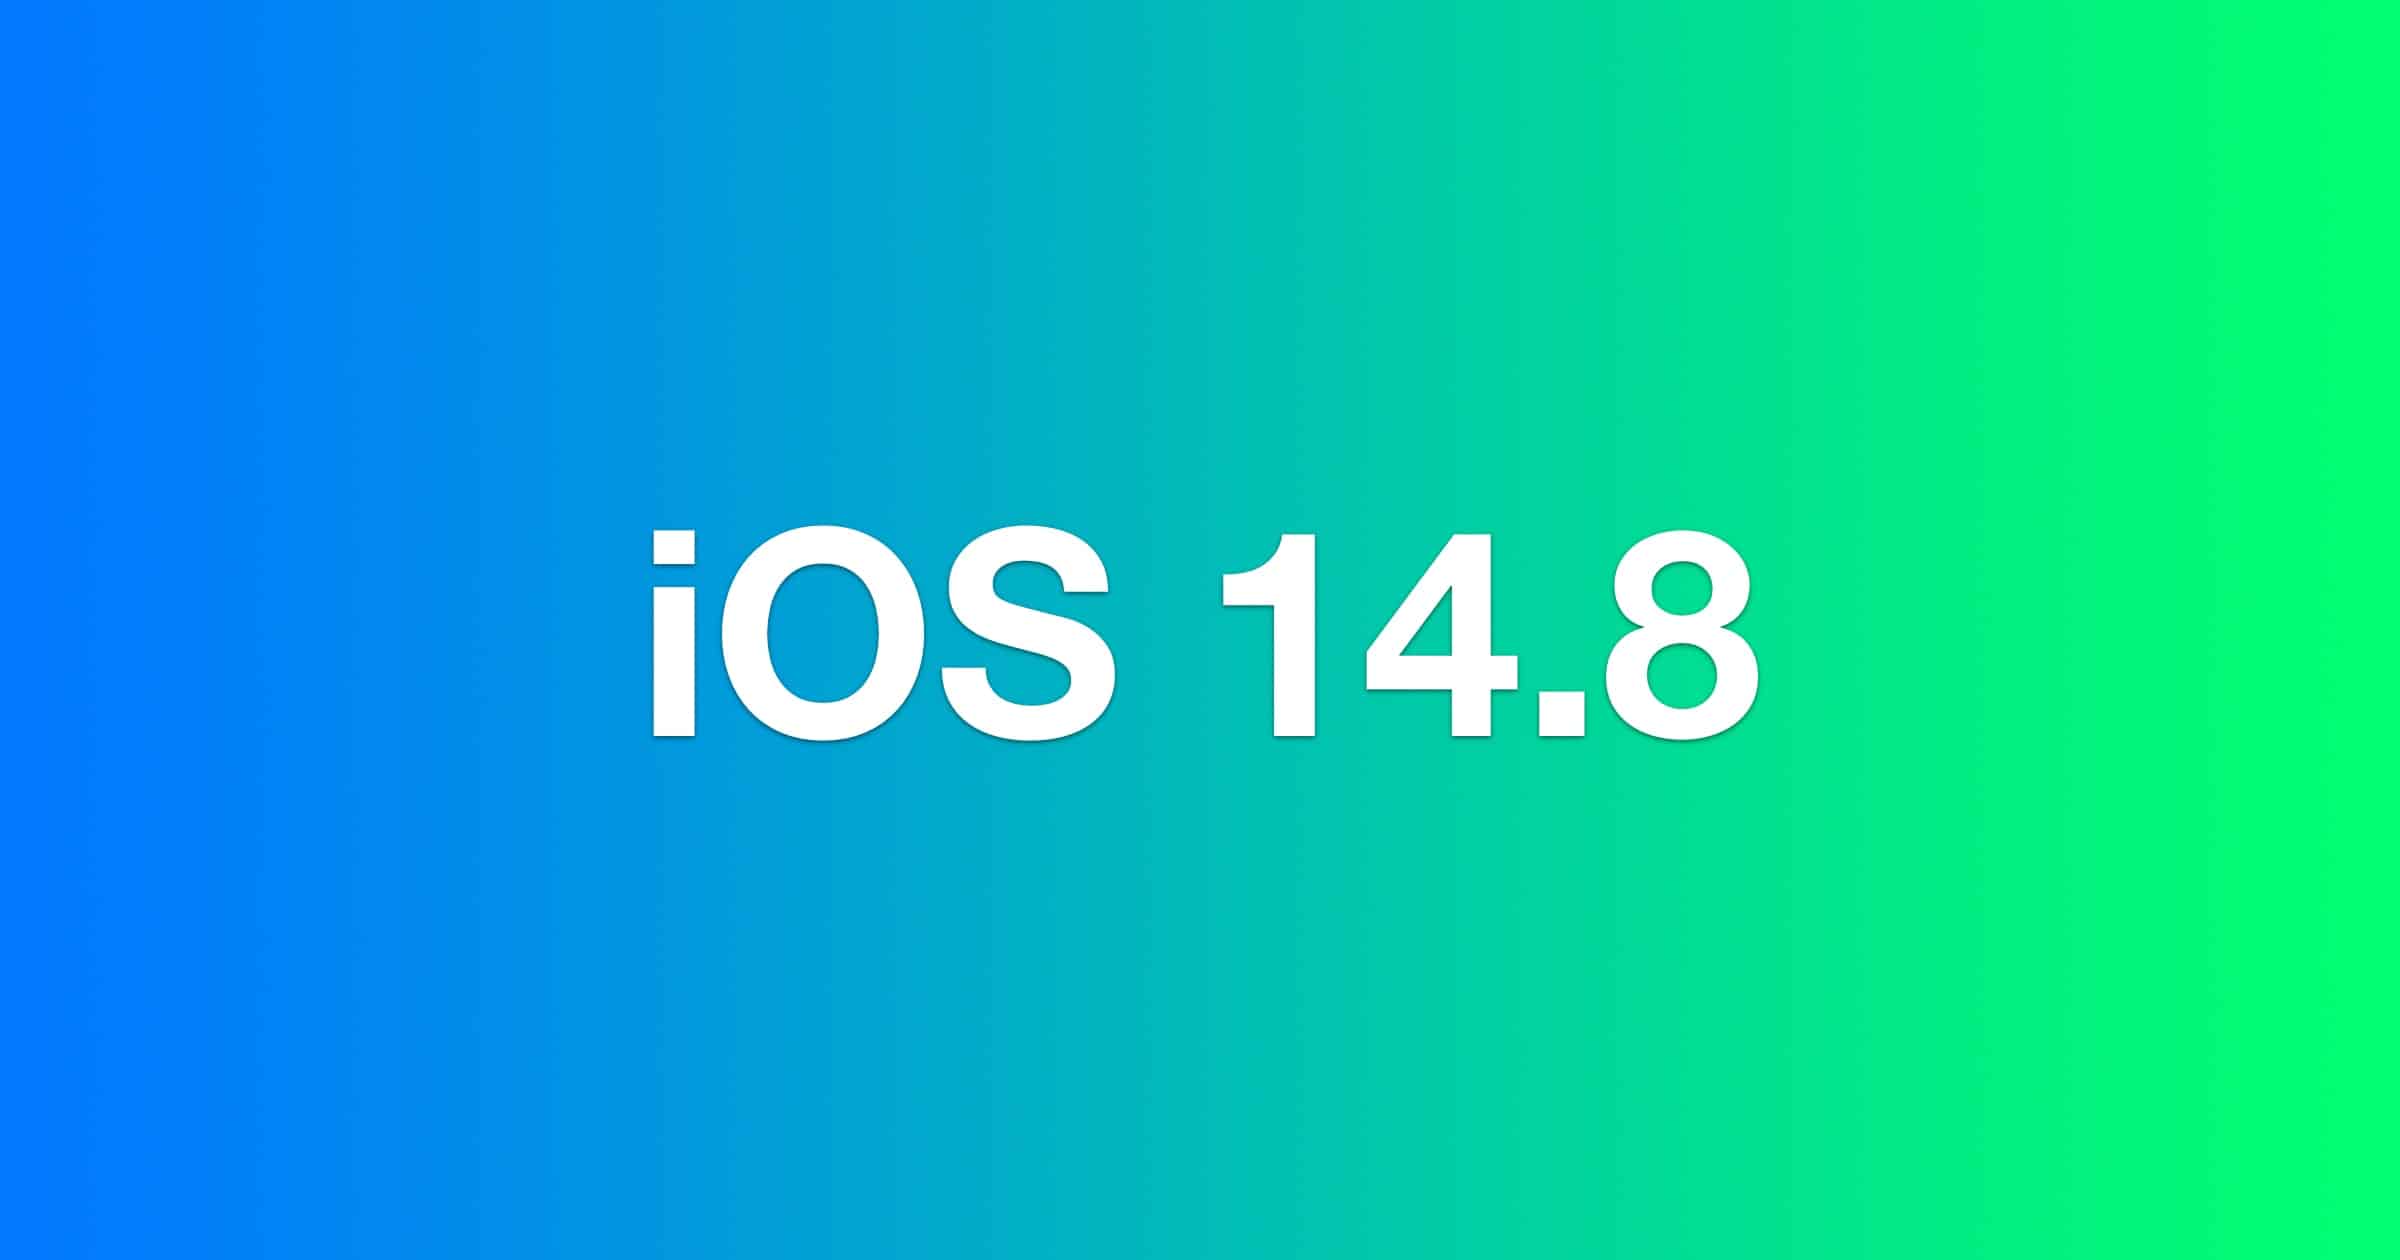 Apple Releases Security Updates With iOS 14.8 Out Today